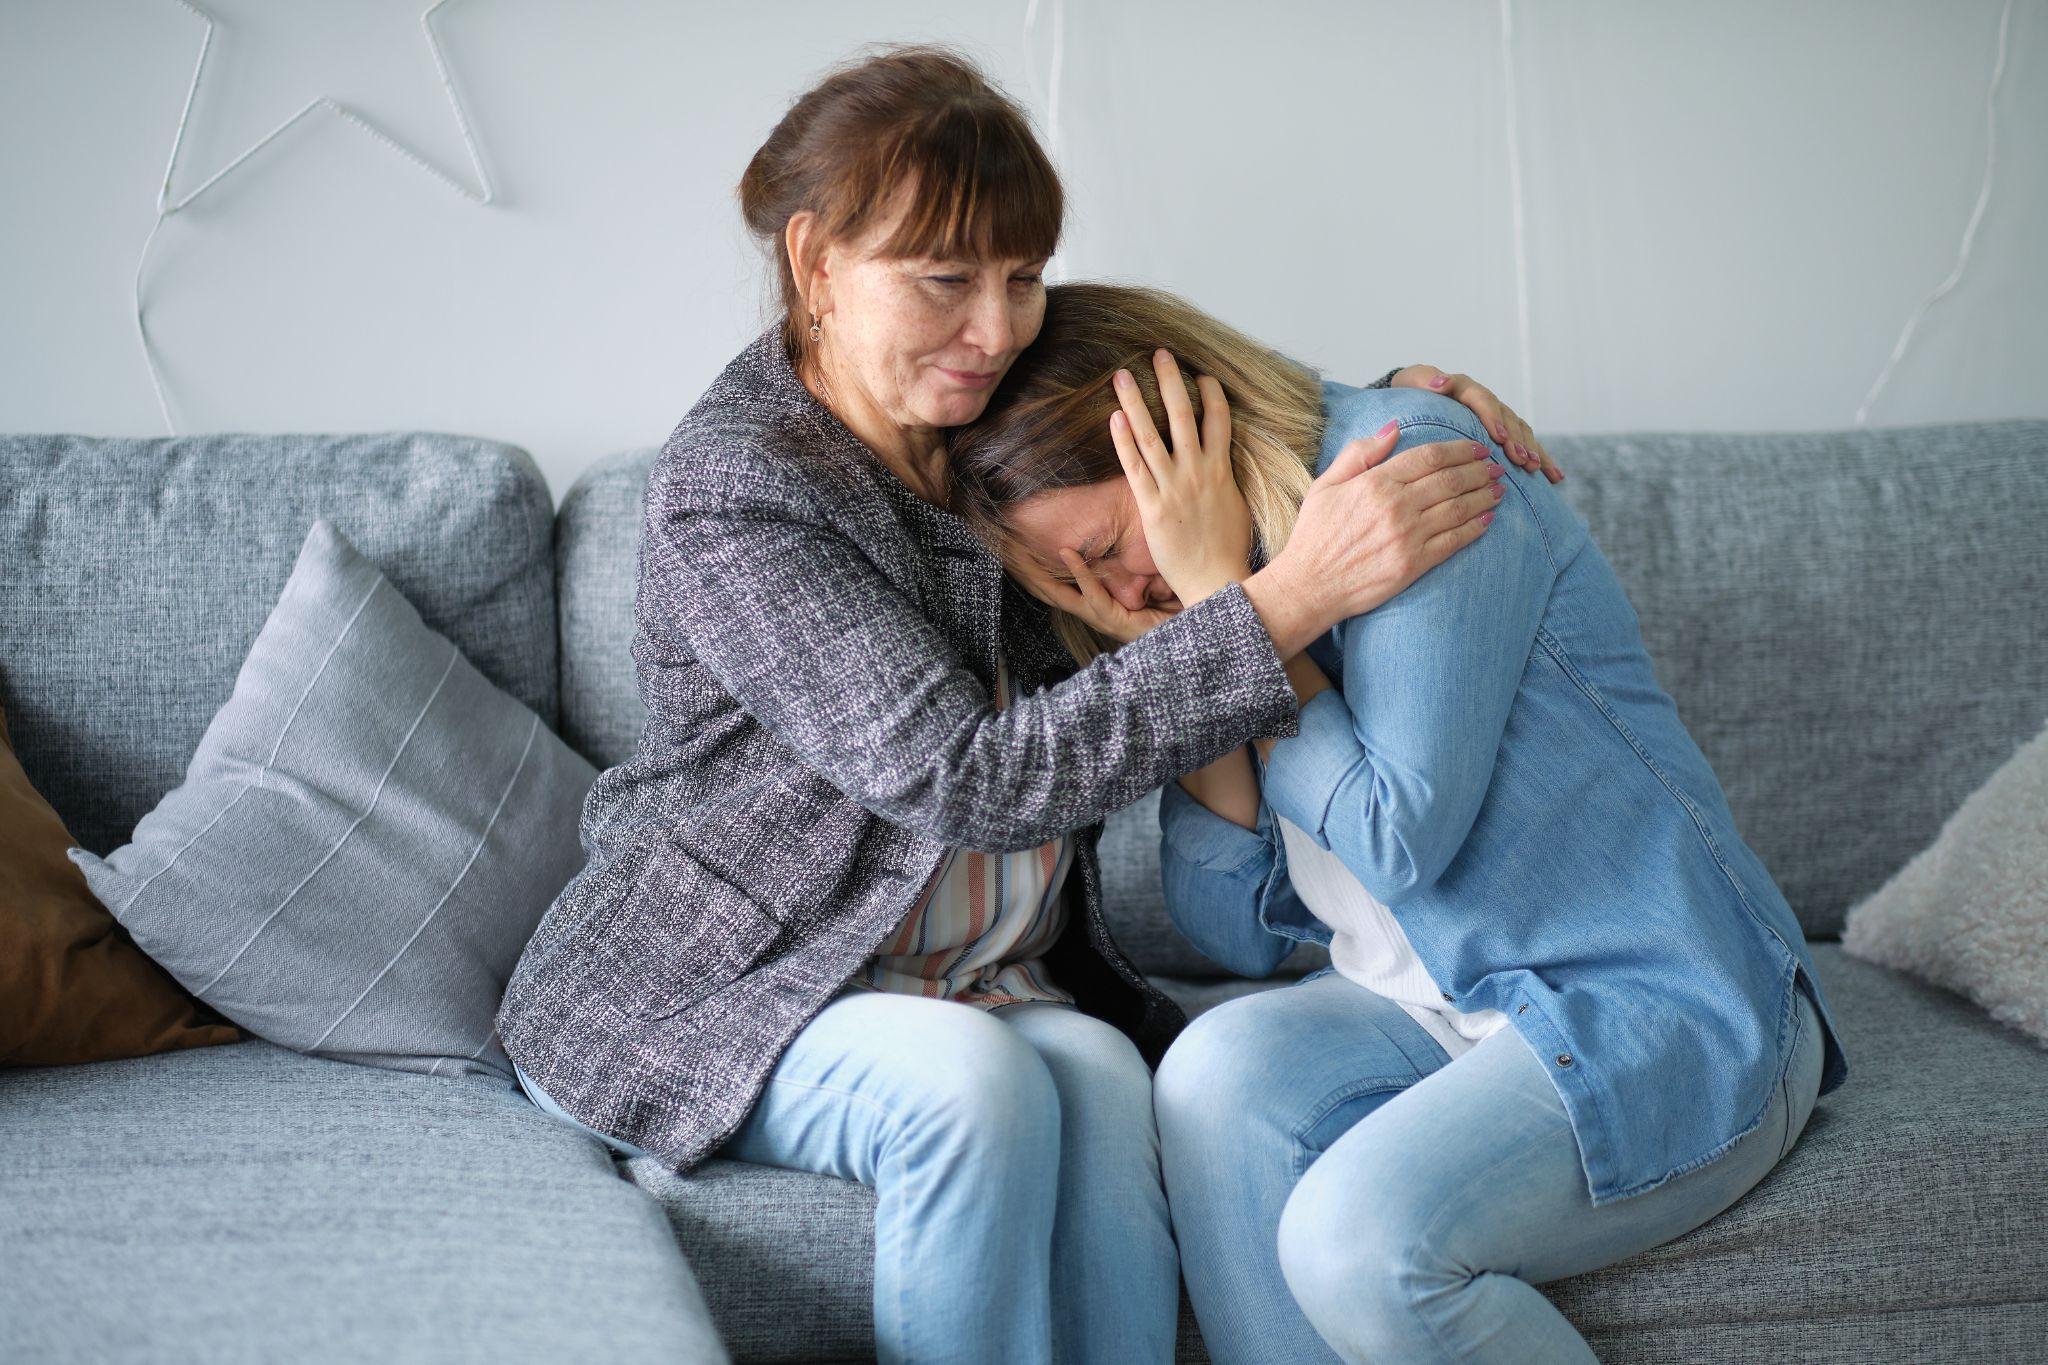 elderly mother hug crying adult daughter show support and care